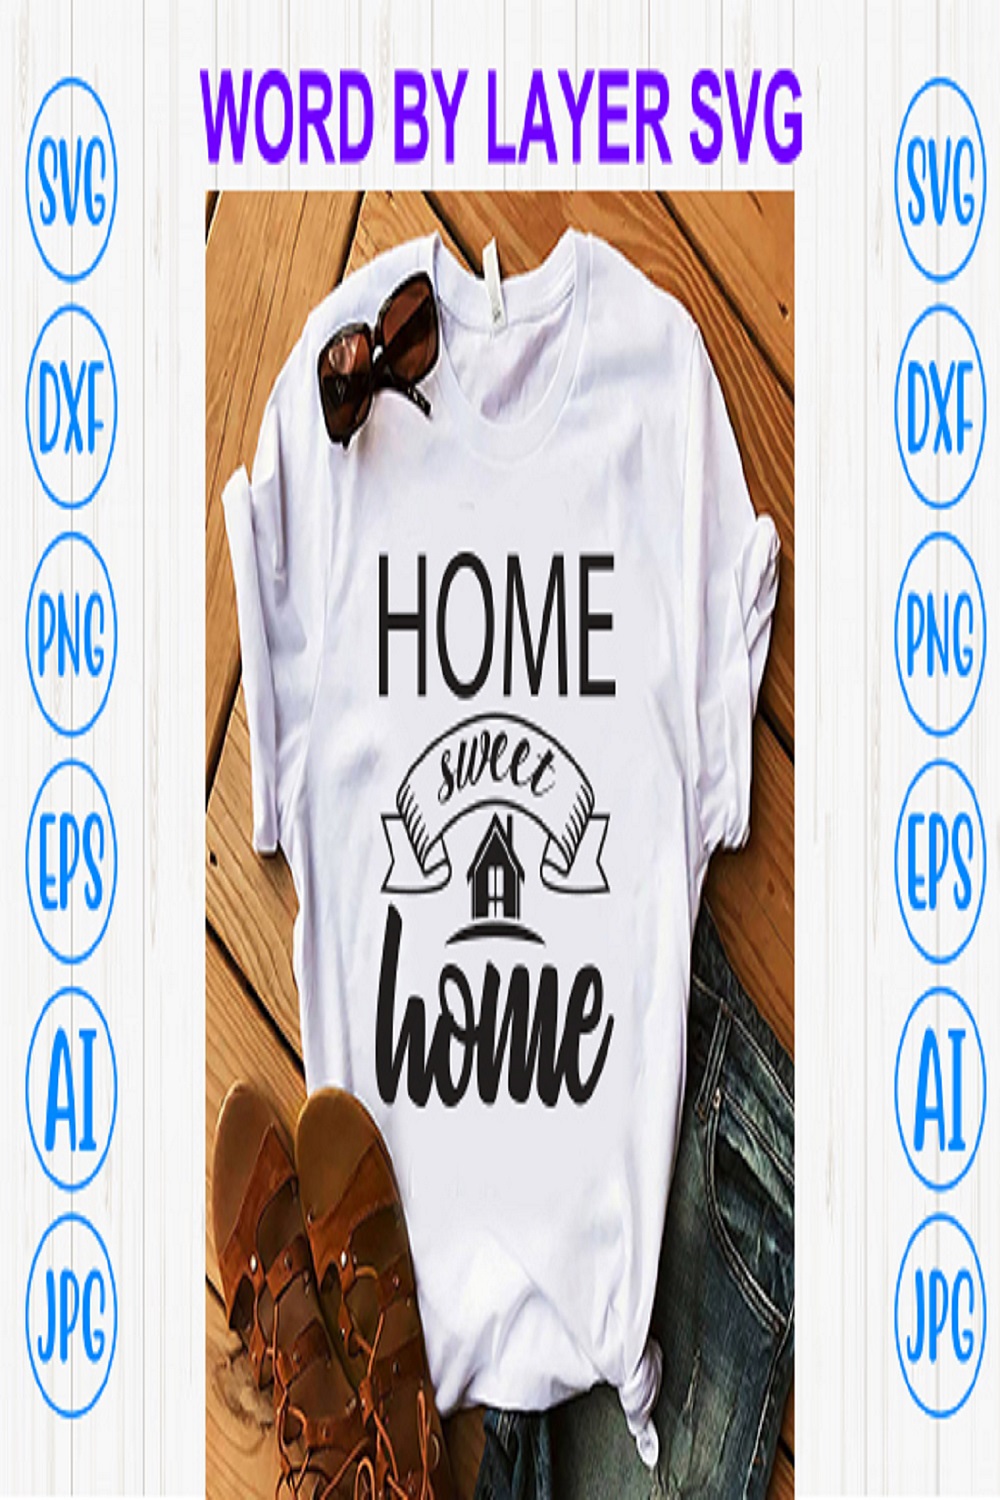 Home sweet home pinterest preview image.